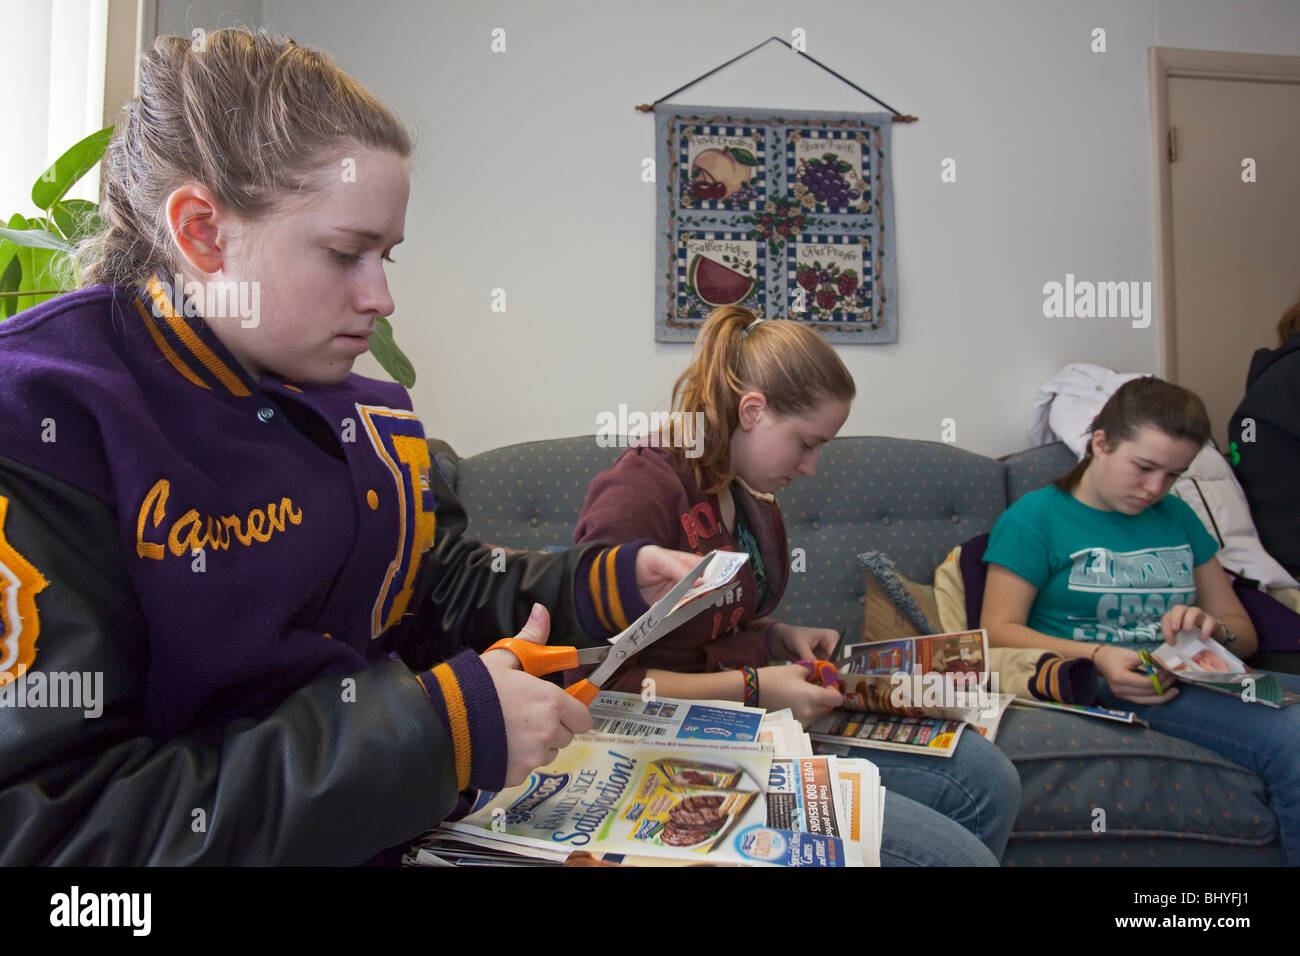 Teens Clip Coupons to Aid Food Purchases at Food Pantry Stock Photo